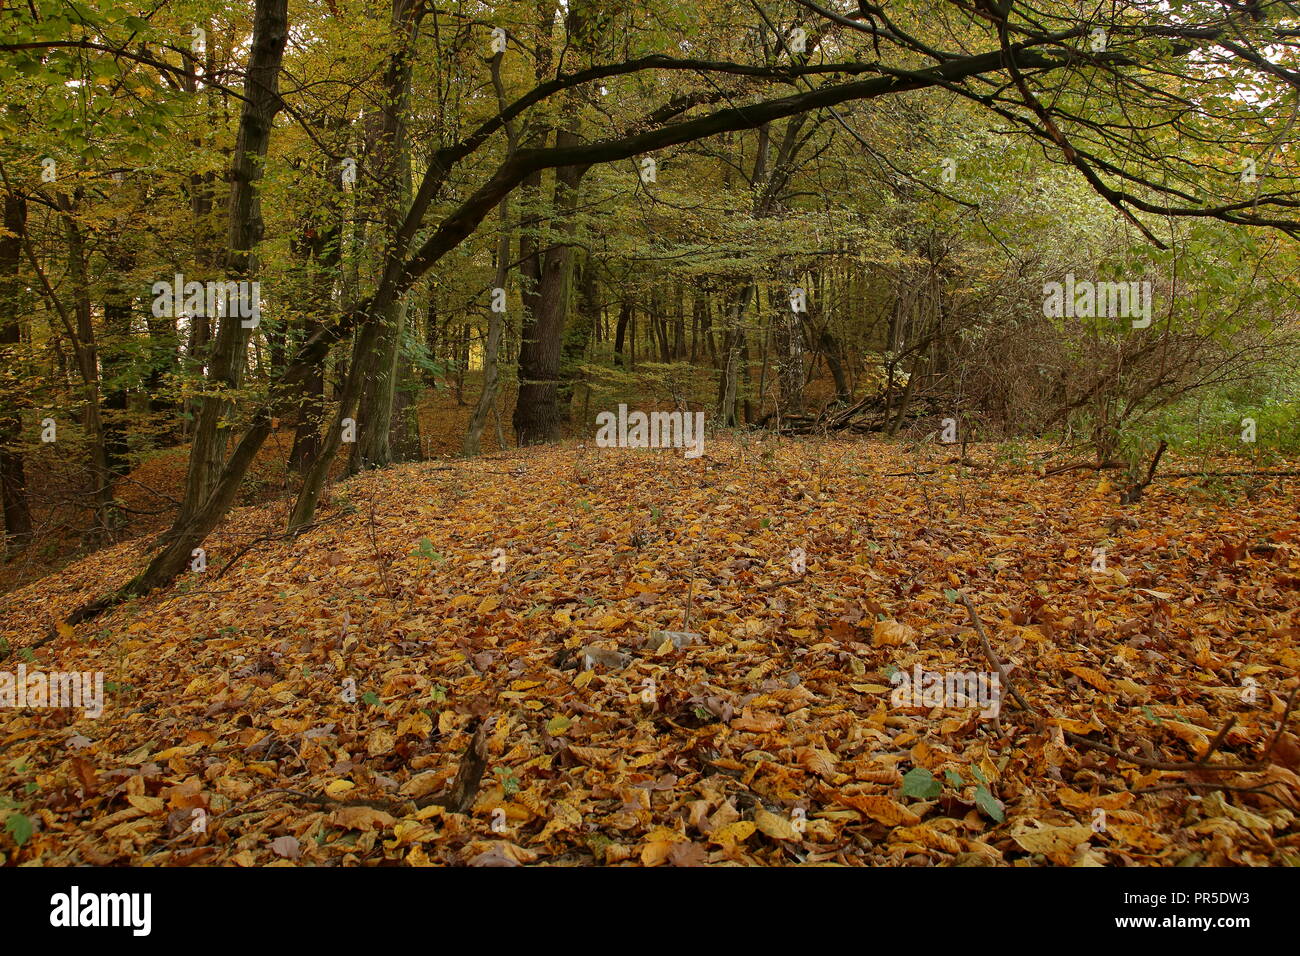 Autumnal (fall) forest, small hill covered with fallen colorful leaves like with carpet, trees, branches. Stock Photo